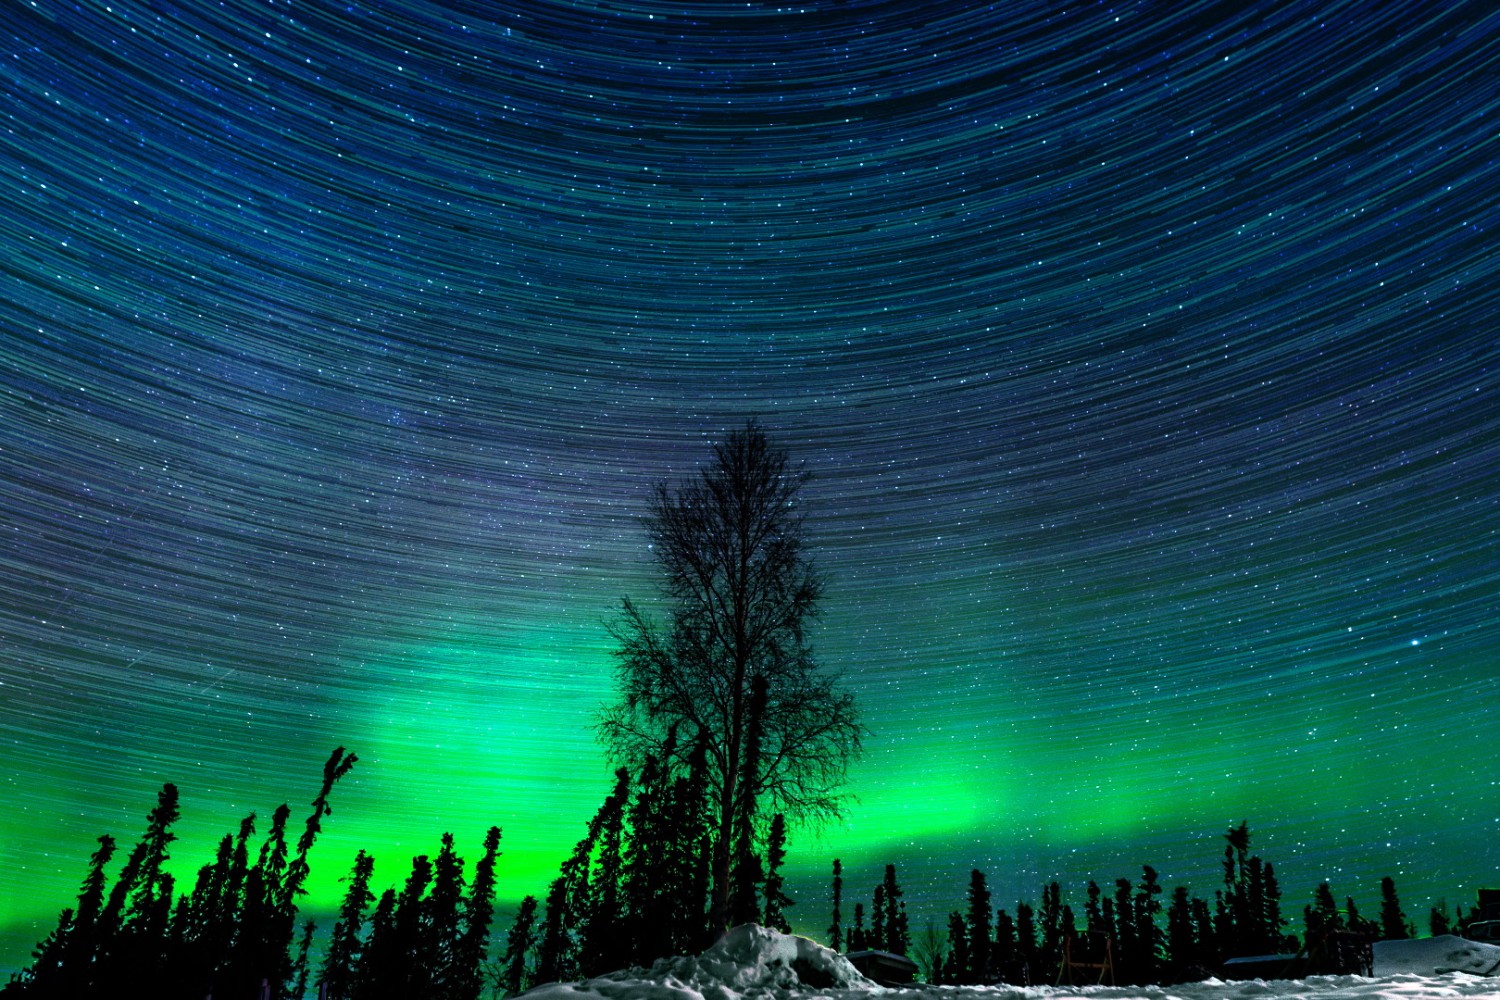 Hypnotic Northern Lights Time-Lapse Captured Over 2 Magical Nights in Alaska